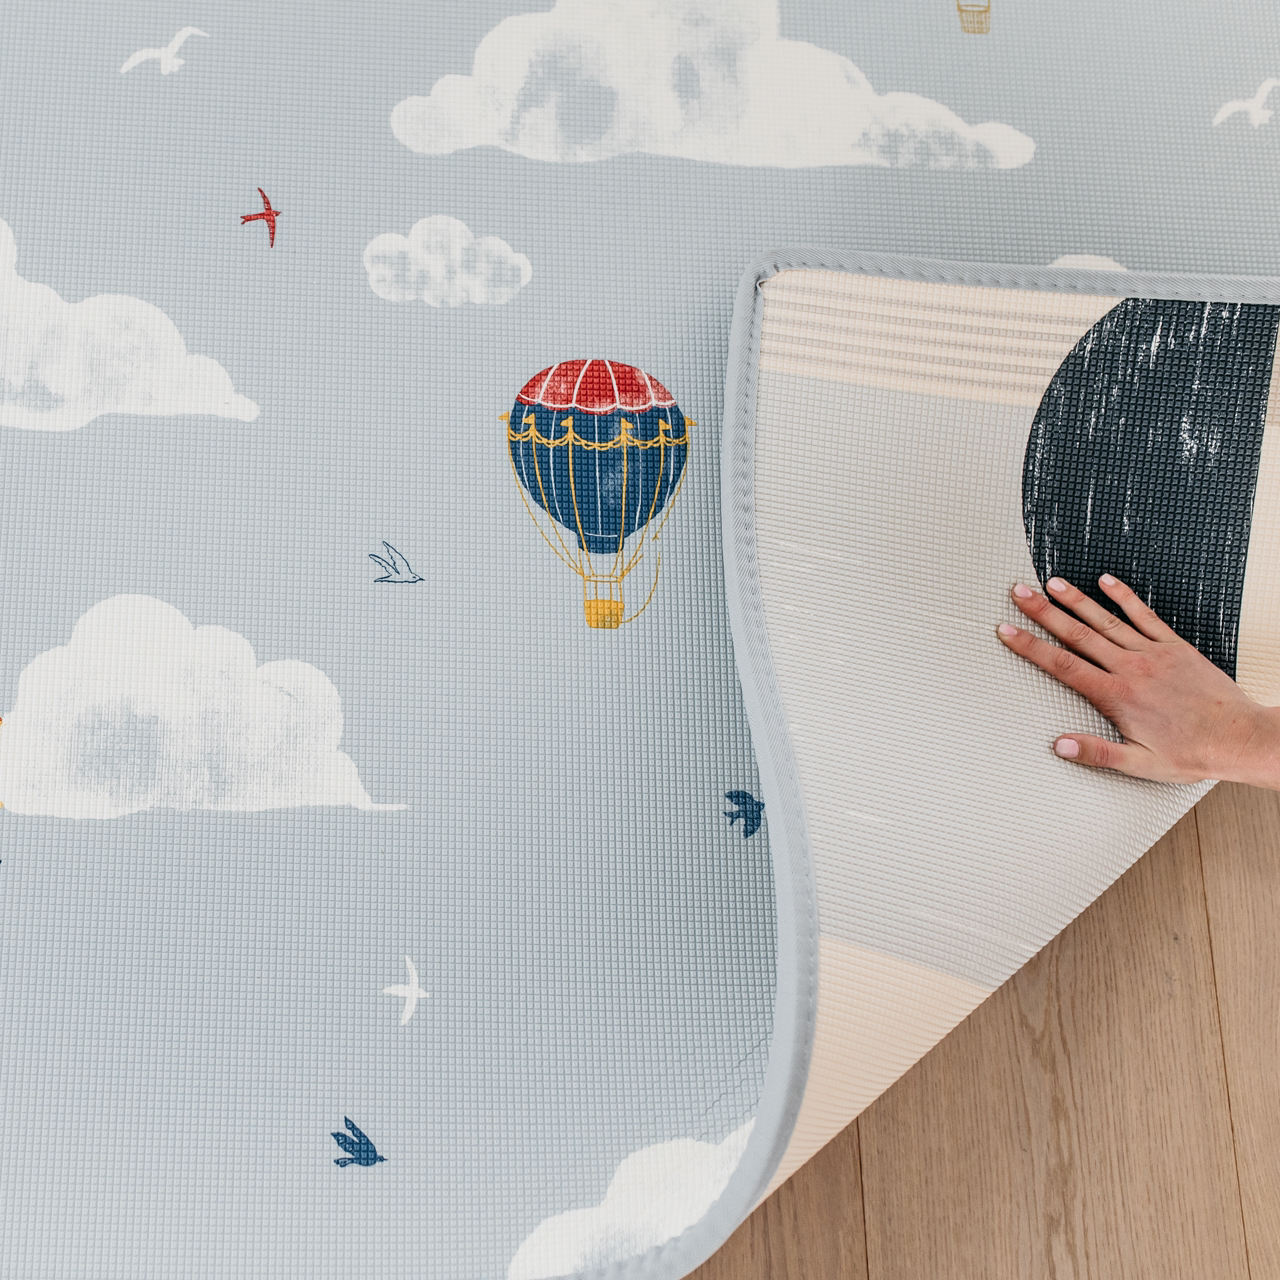 Moonlight Geo/ In The Clouds Blue Play Mat